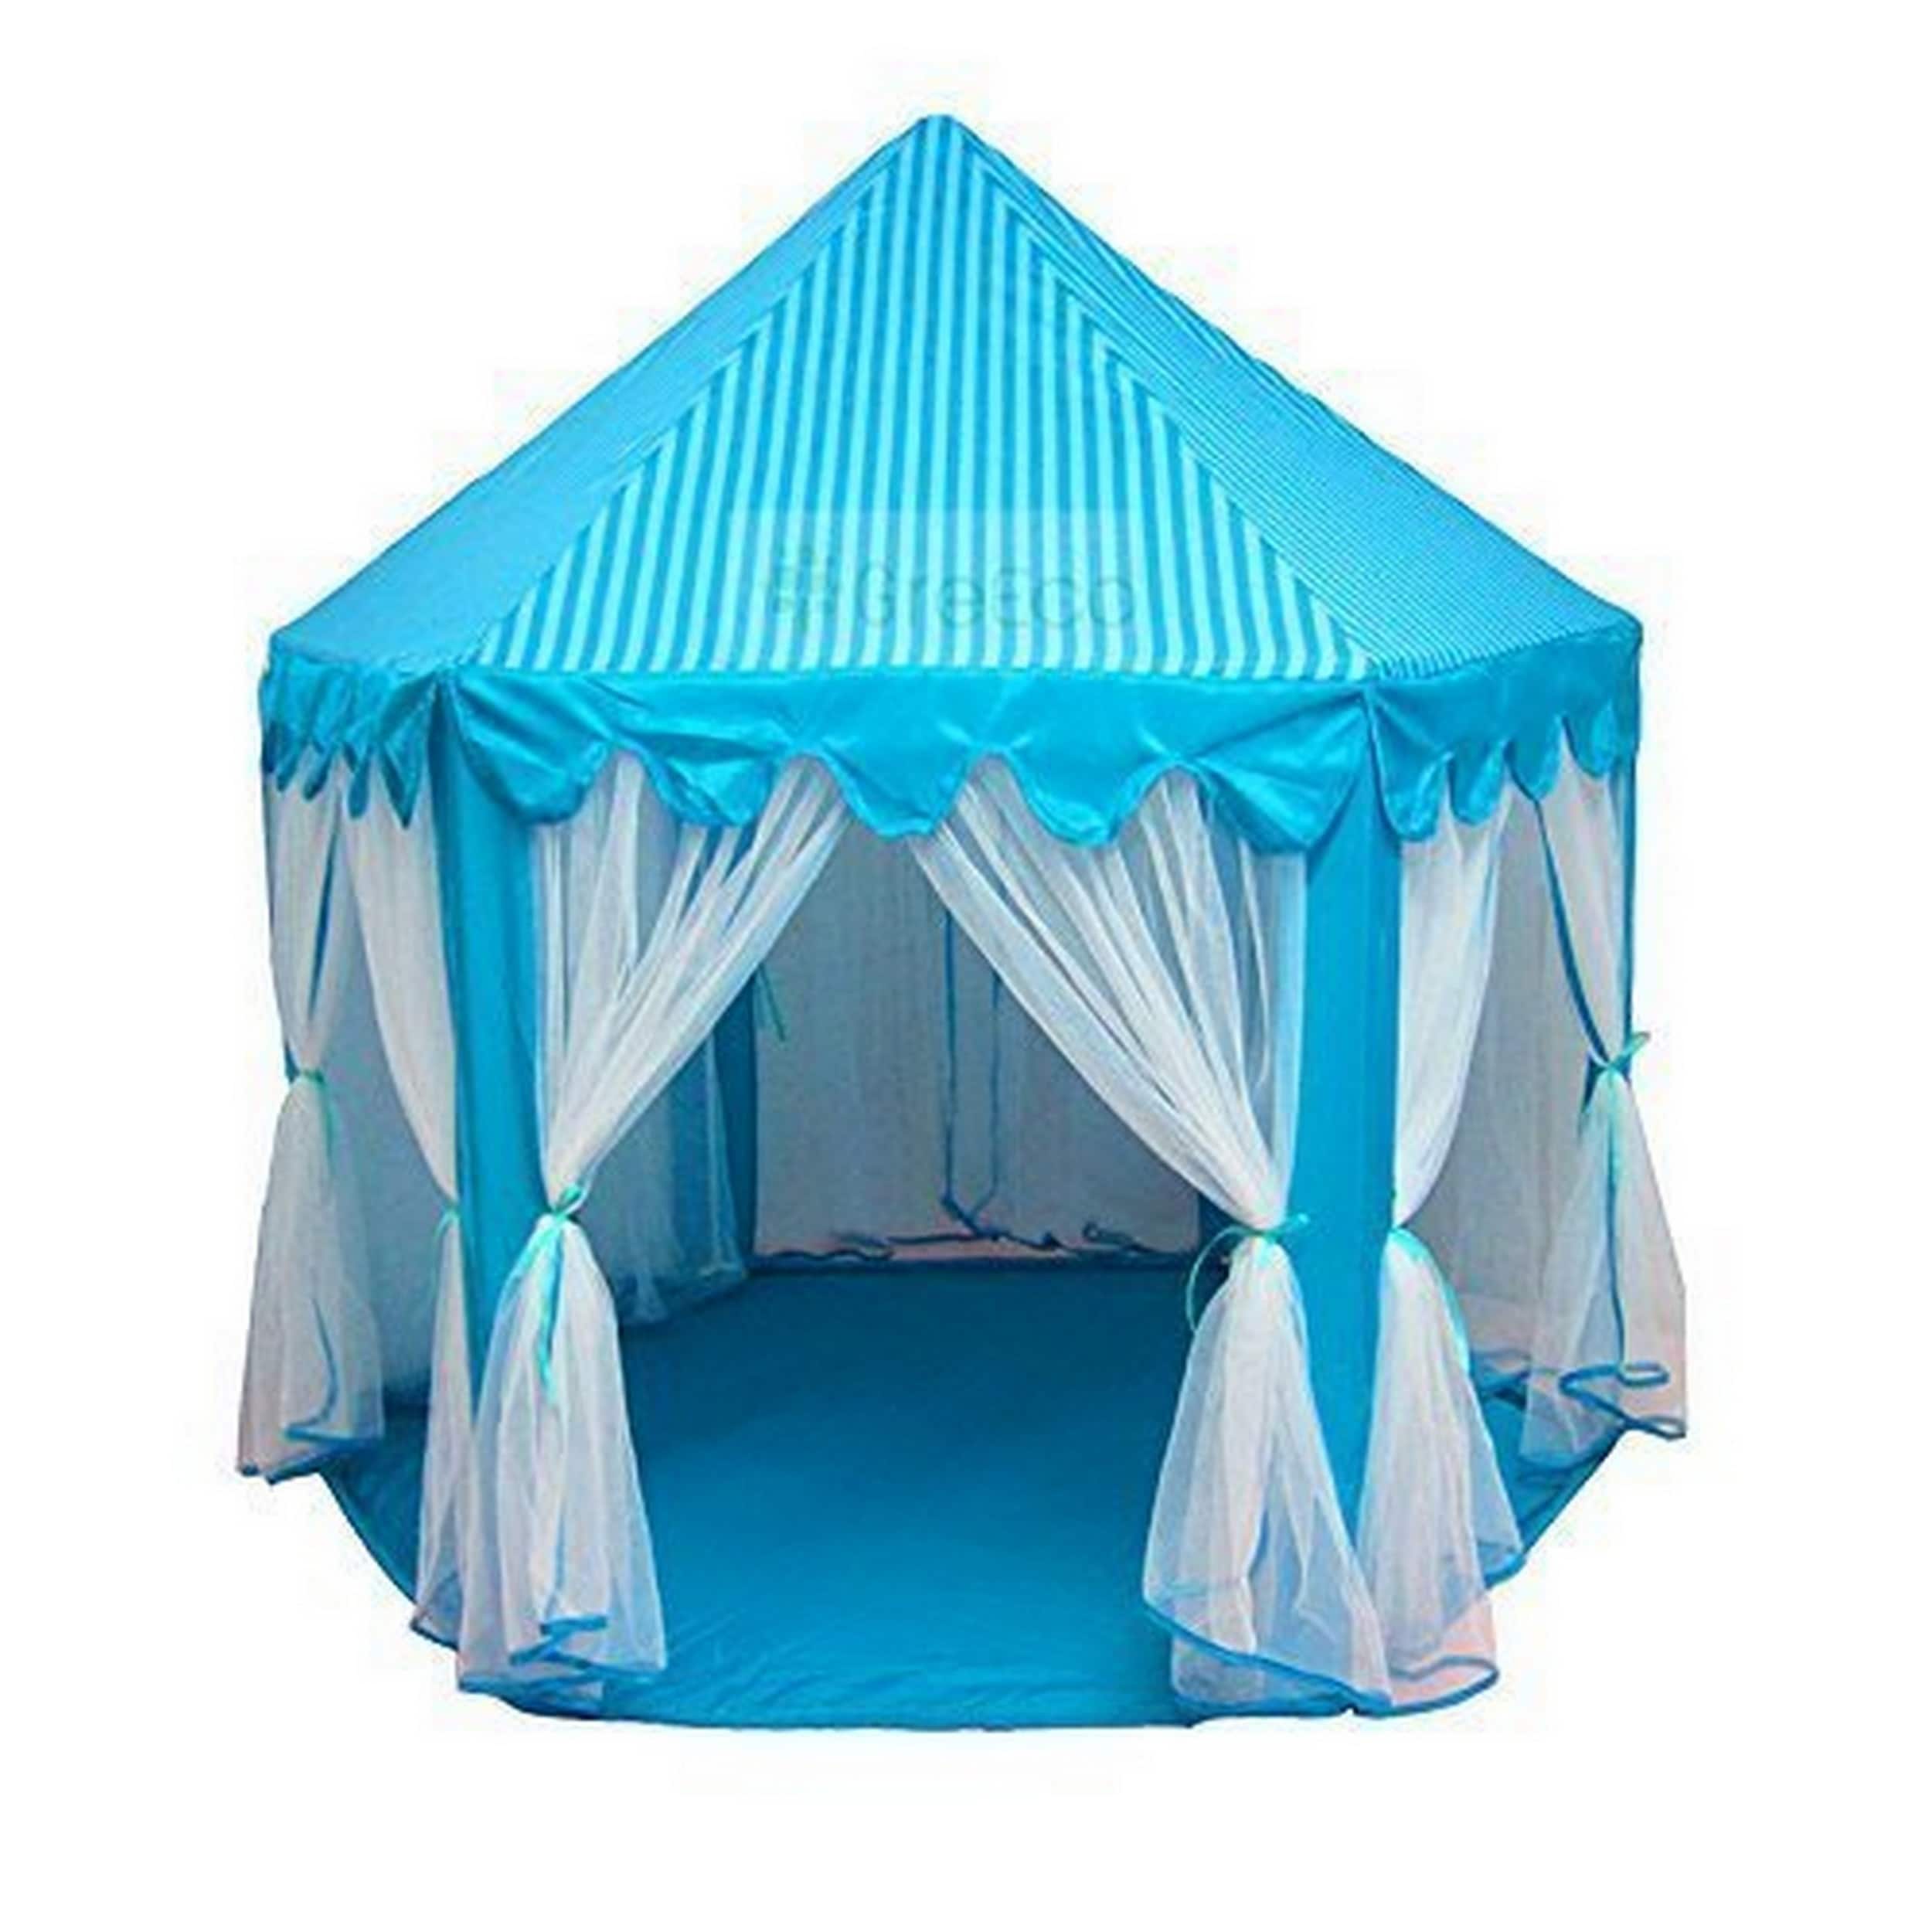 55'' x 53'' Girls Large Princess Castle Play Tent with Star Lights - Blue_3pc